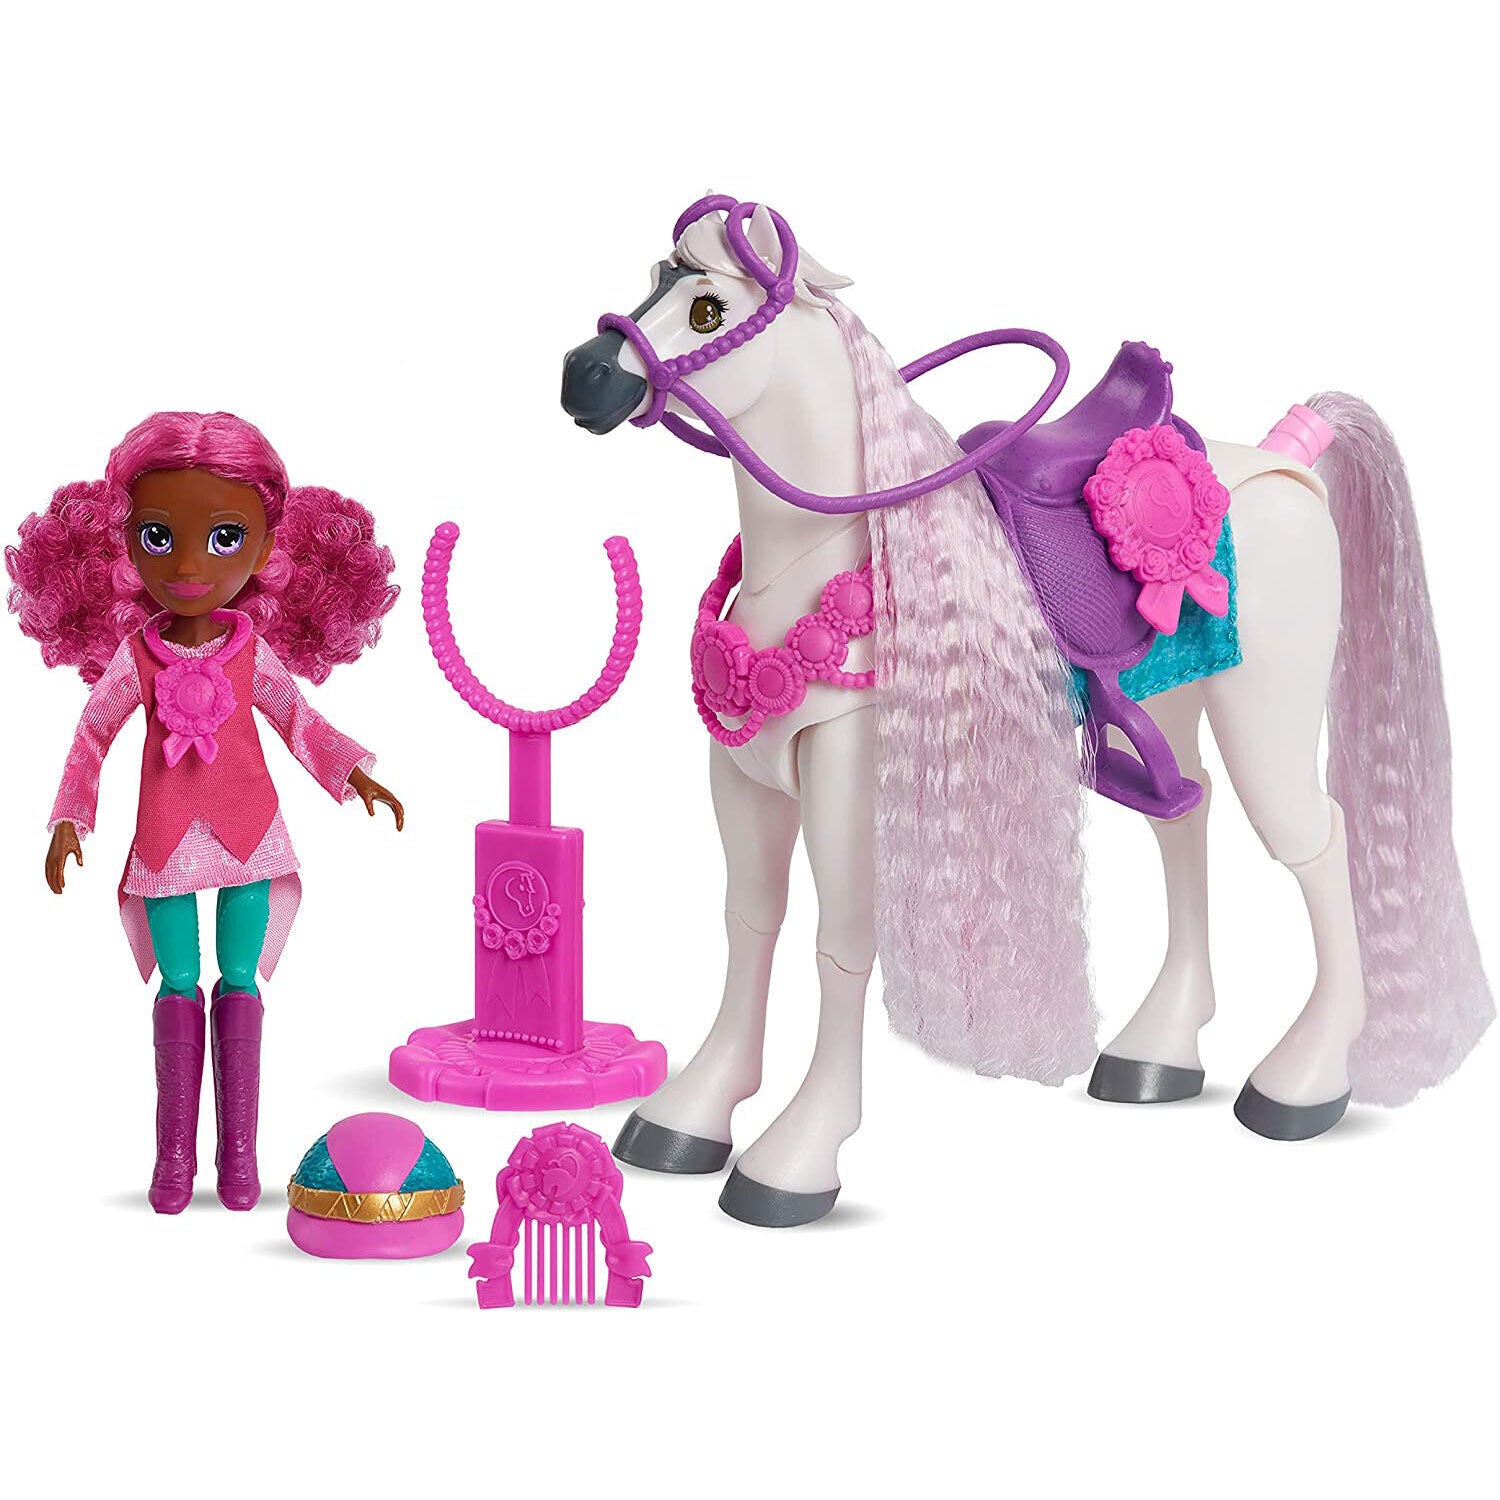 Winner’s Stable Doll and Horse 11-Piece Set - Madison and Huntley